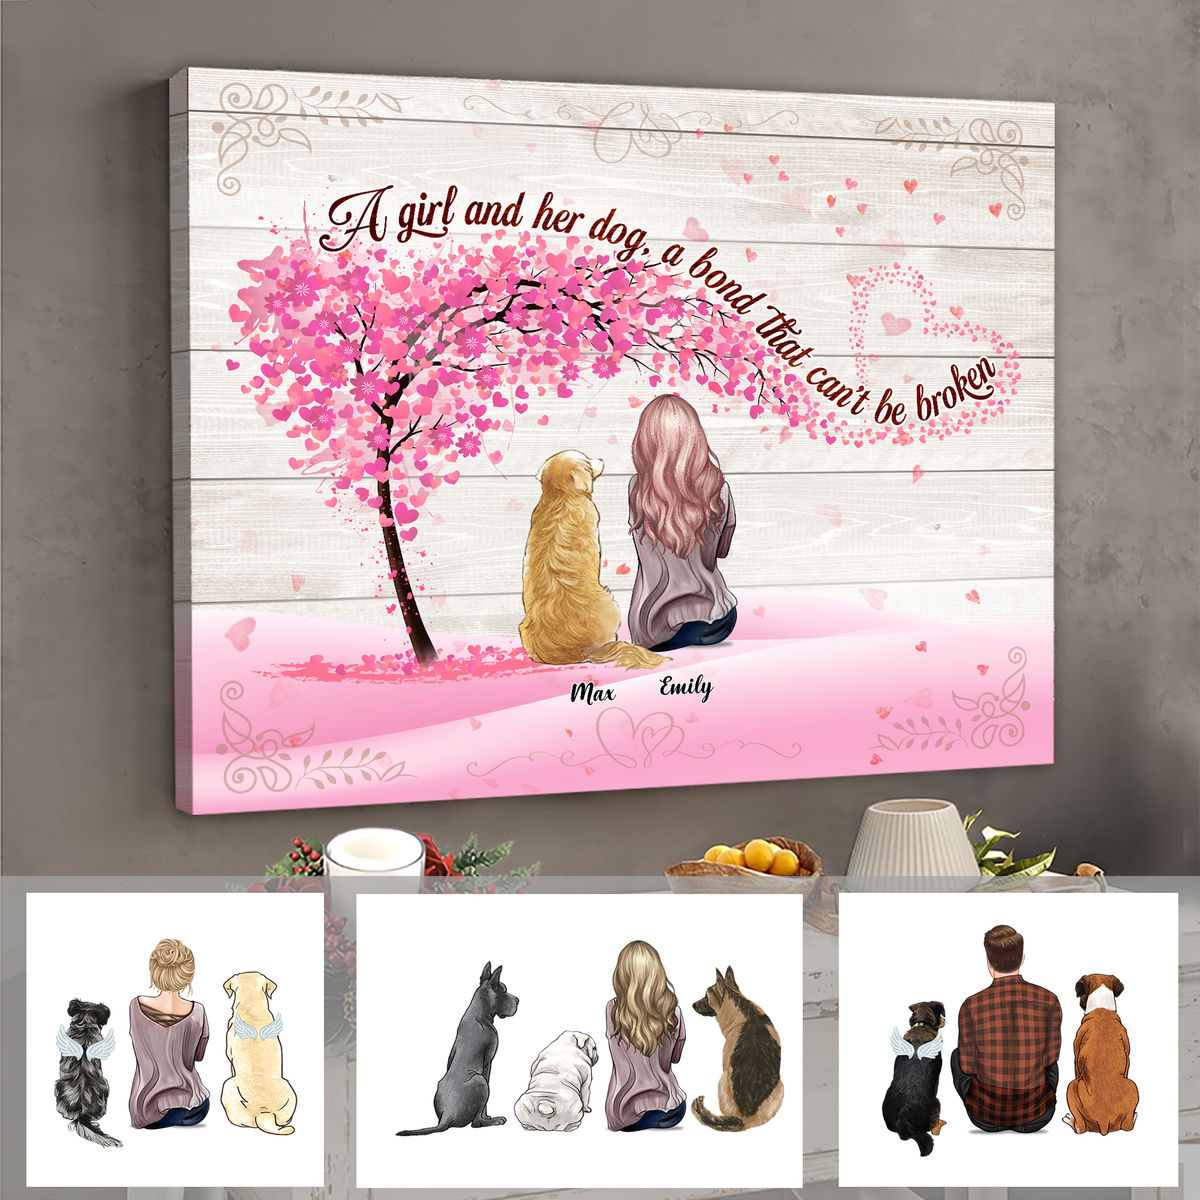 Personalized Wrapped Canvas - Dog Lovers Canvas - Christmas Gift - A girl and her dog, a bond that can't be broken - Dog Lover Gifts